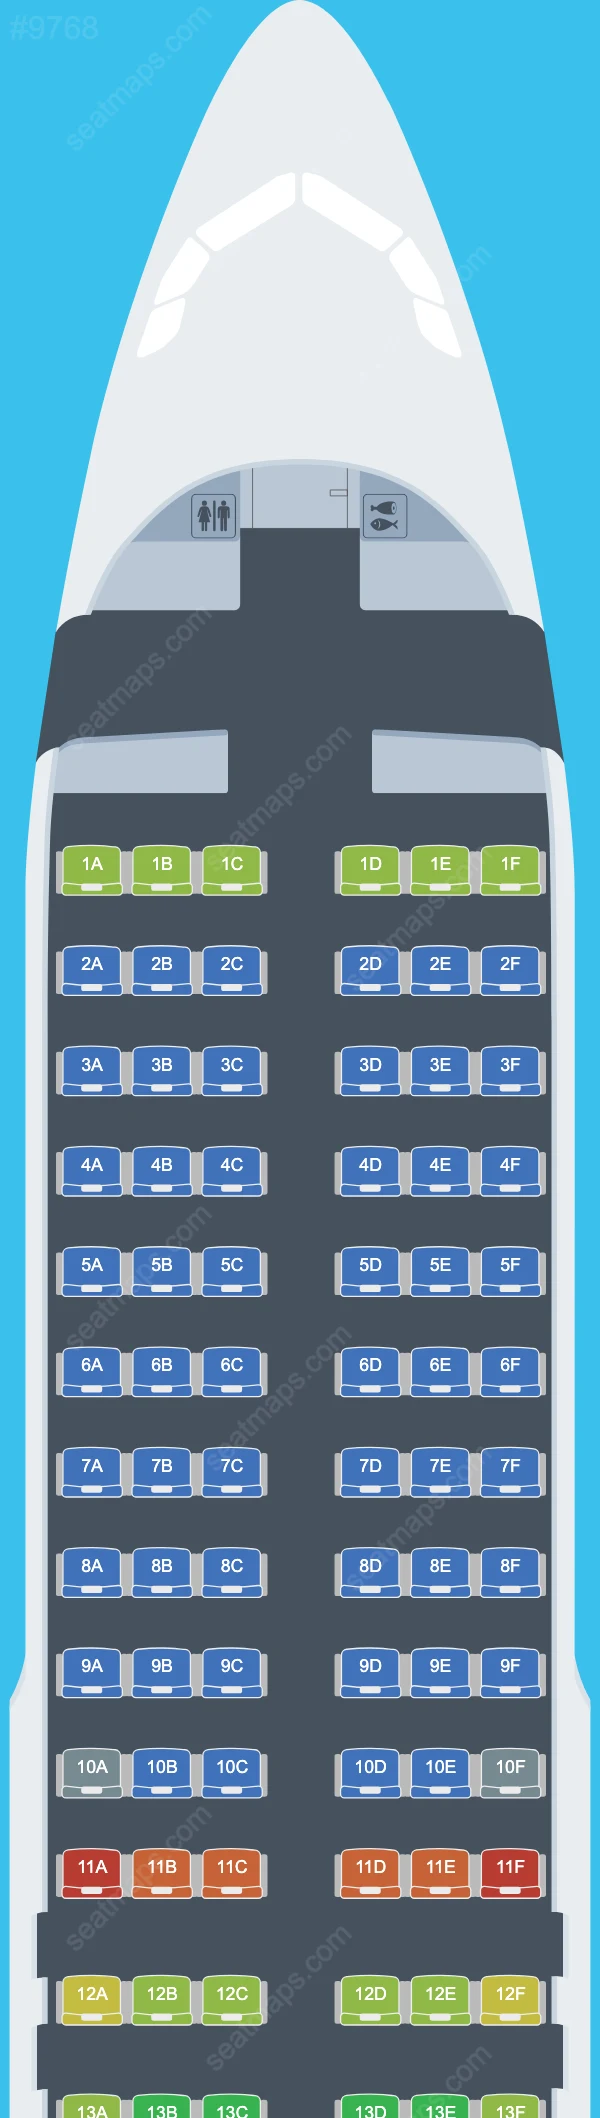 China Express Airlines Airbus A320-200 V.1 seatmap preview